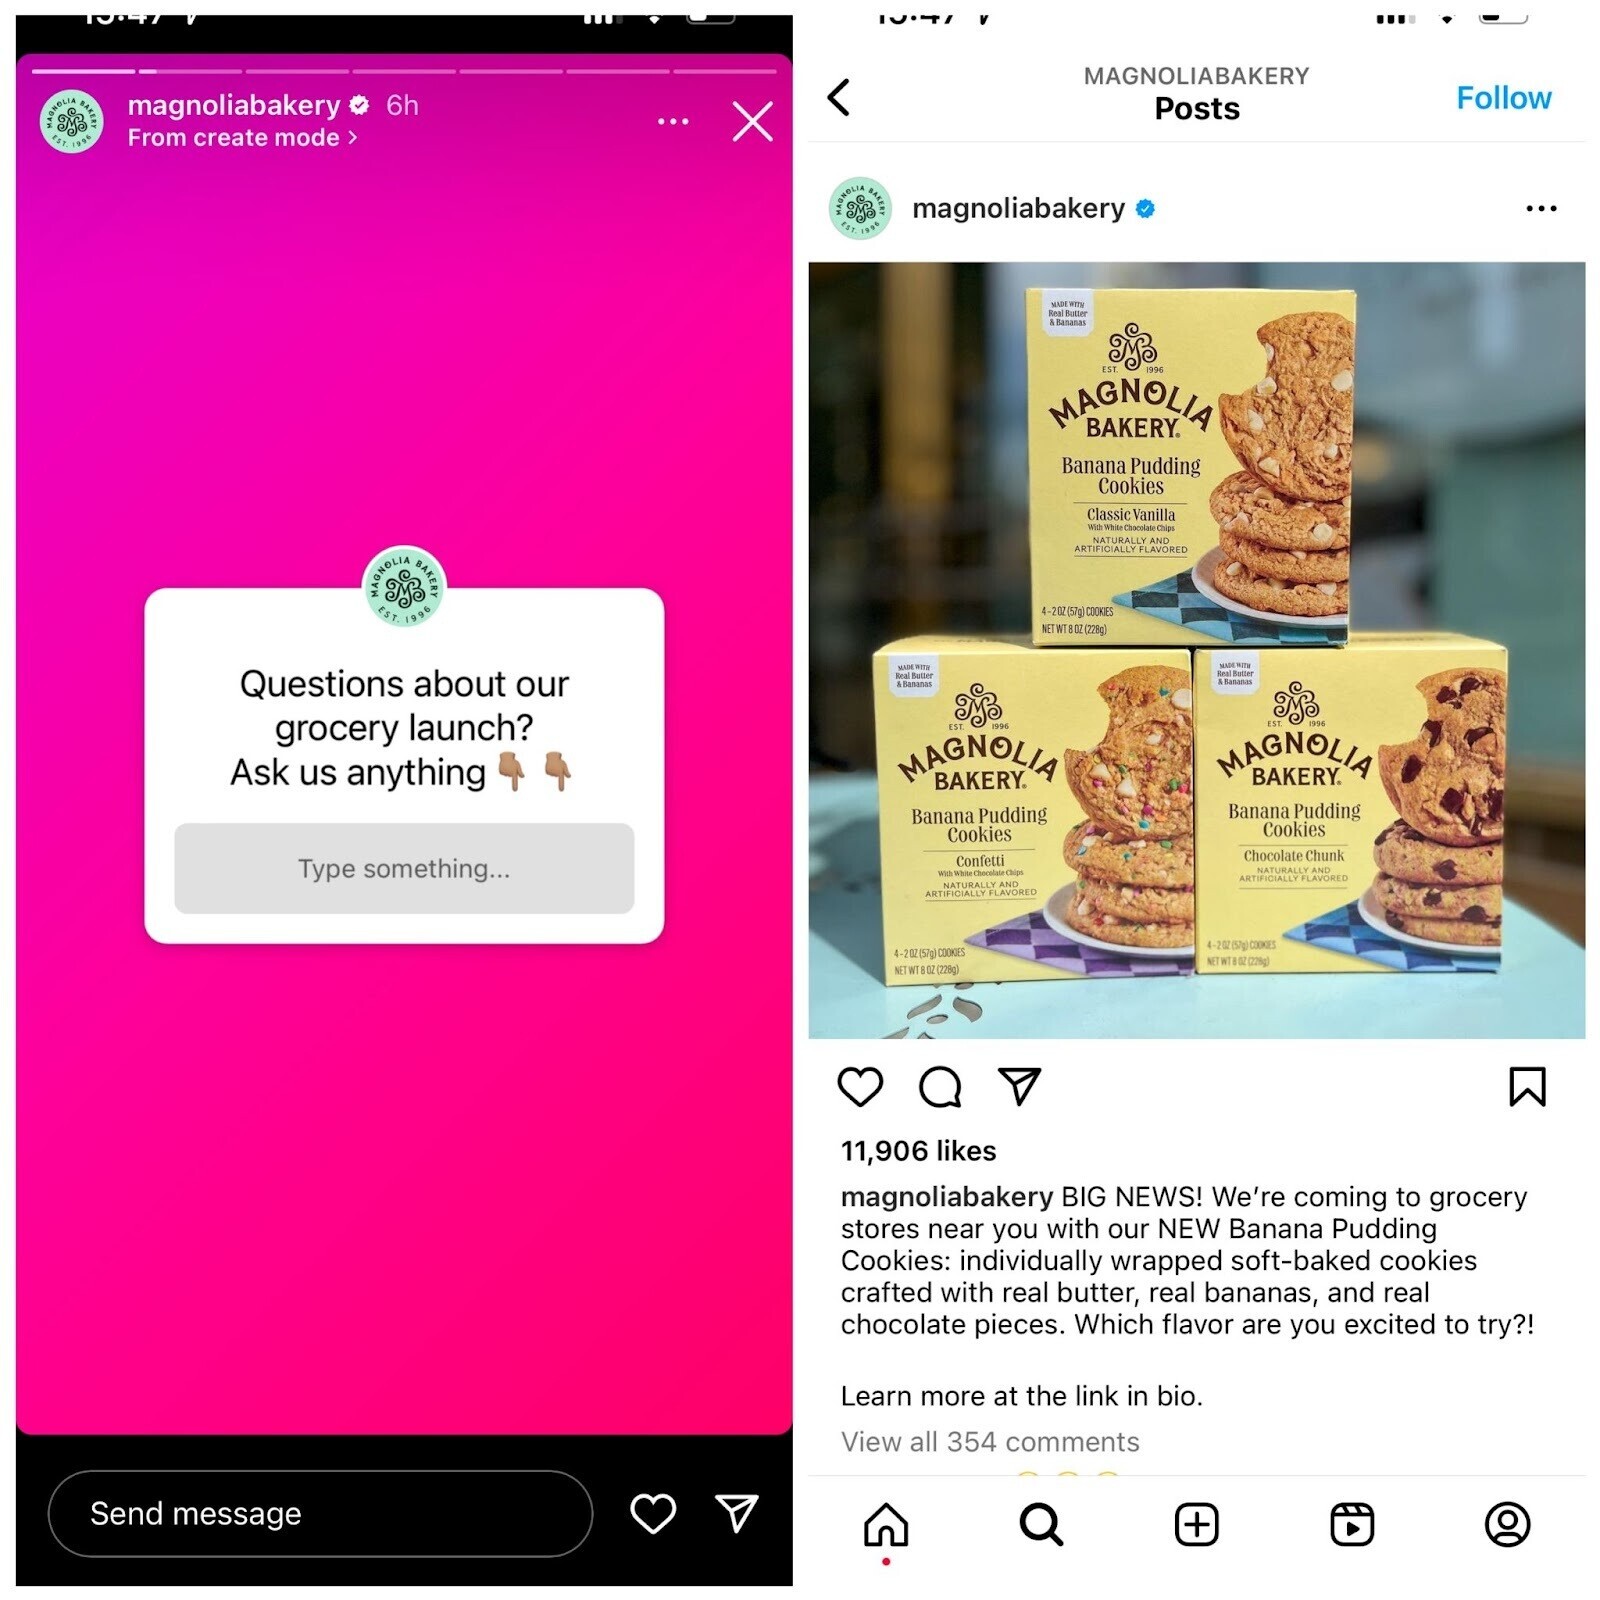 Magnolia Bakery uses Instagram to answer questions from its followers